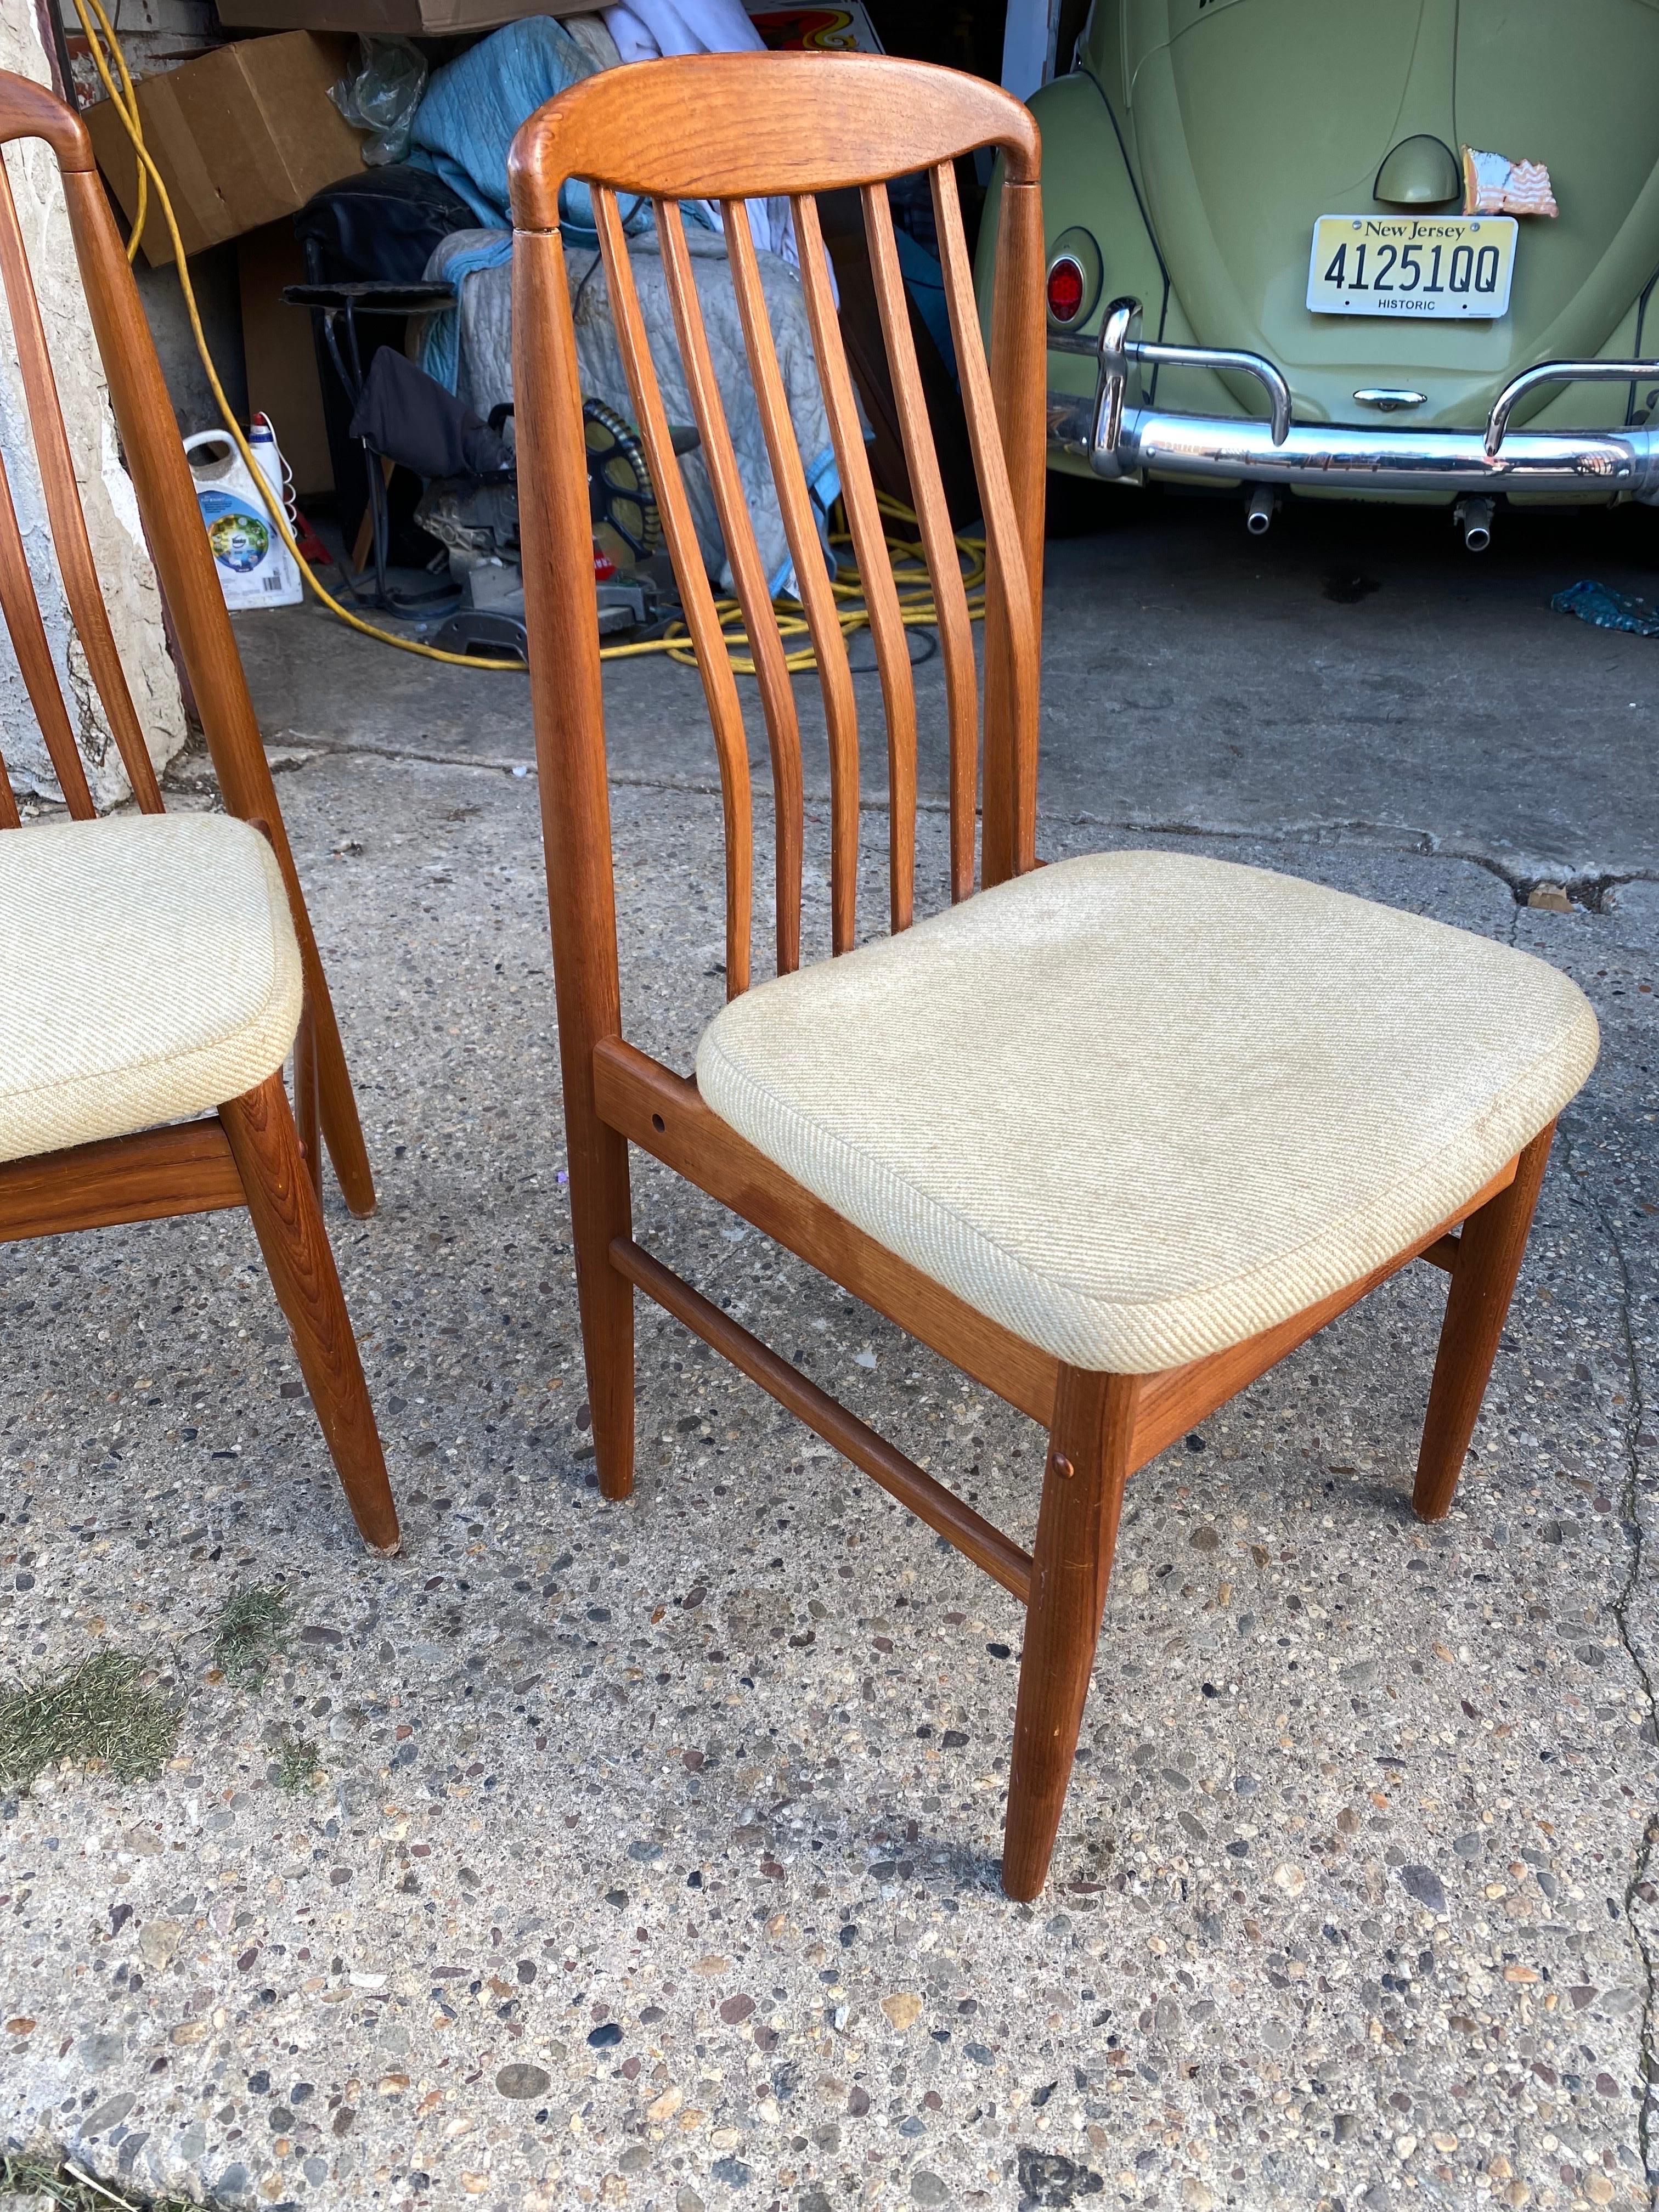 Pair of Benny Linden Teak Dining Chairs with Upholstered Seats.  Perfect to add to your existing set or use with a desk!  Seats show wear, but wood is very nice.  Couple wood buttons missing.